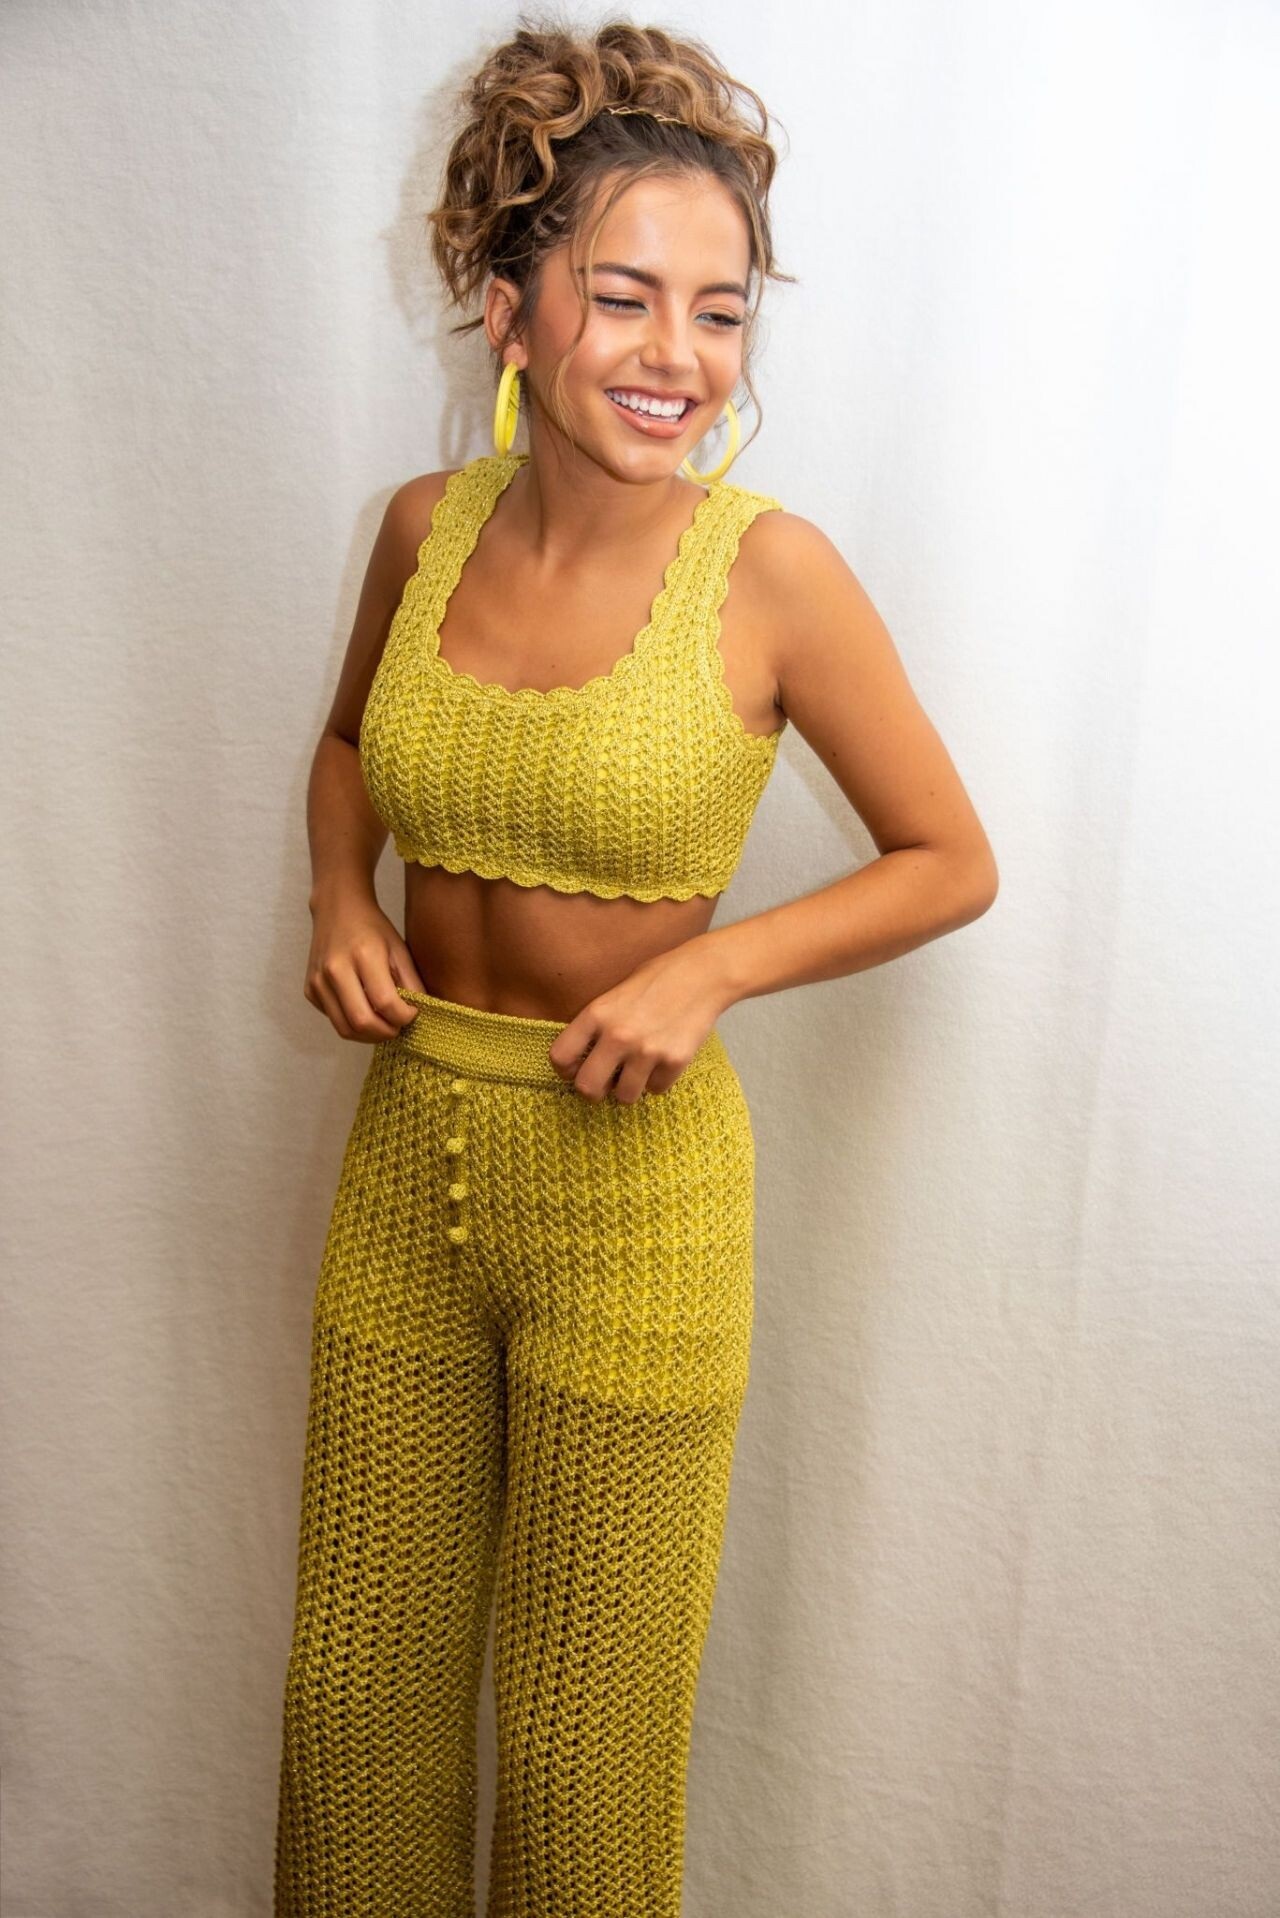 Isabela Moner At The Press Conference Of Dora And The Lost City Of Gold